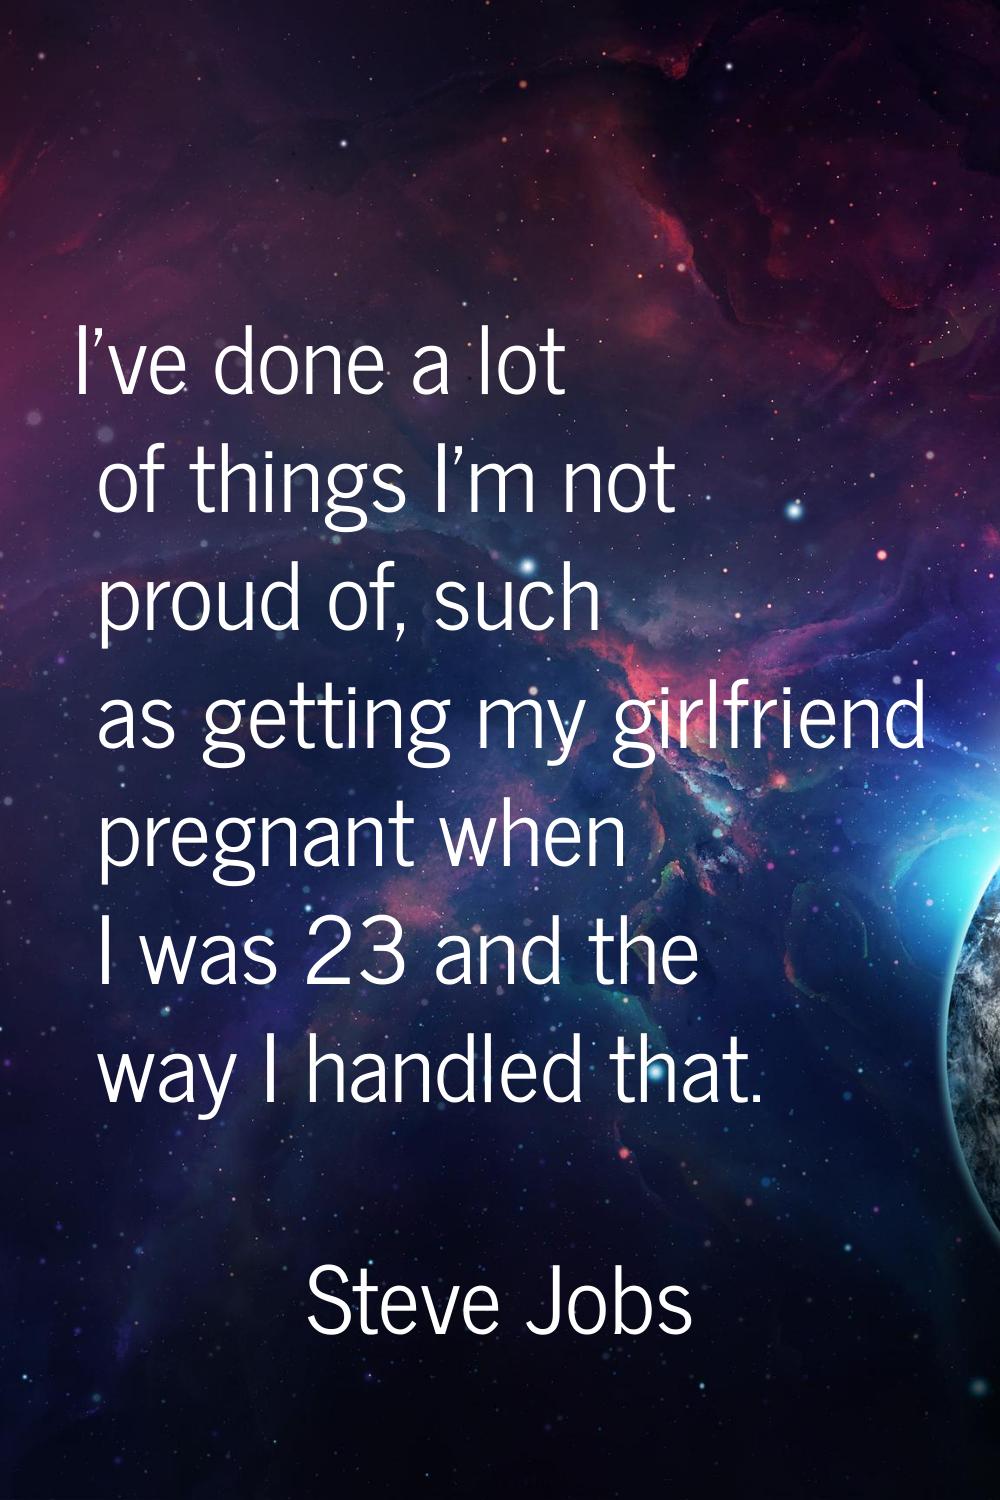 I've done a lot of things I'm not proud of, such as getting my girlfriend pregnant when I was 23 an